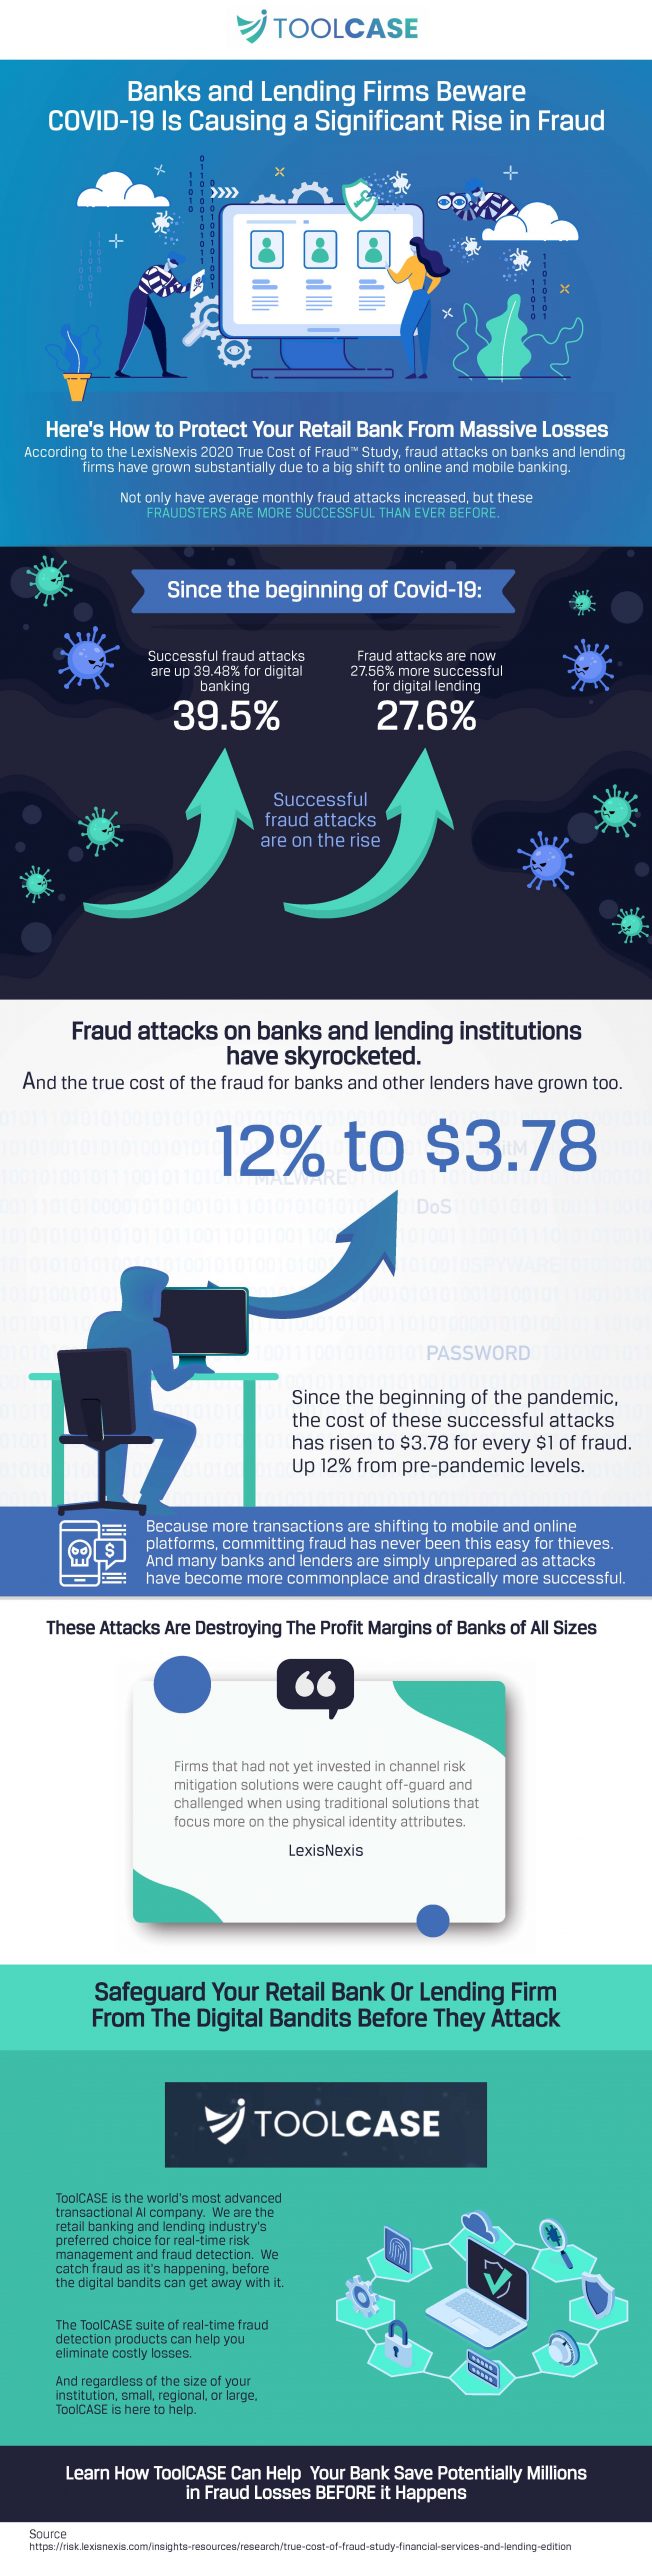 Banks and Lending Firms Beware COVID-19 Is Causing a Significant Rise in Fraud